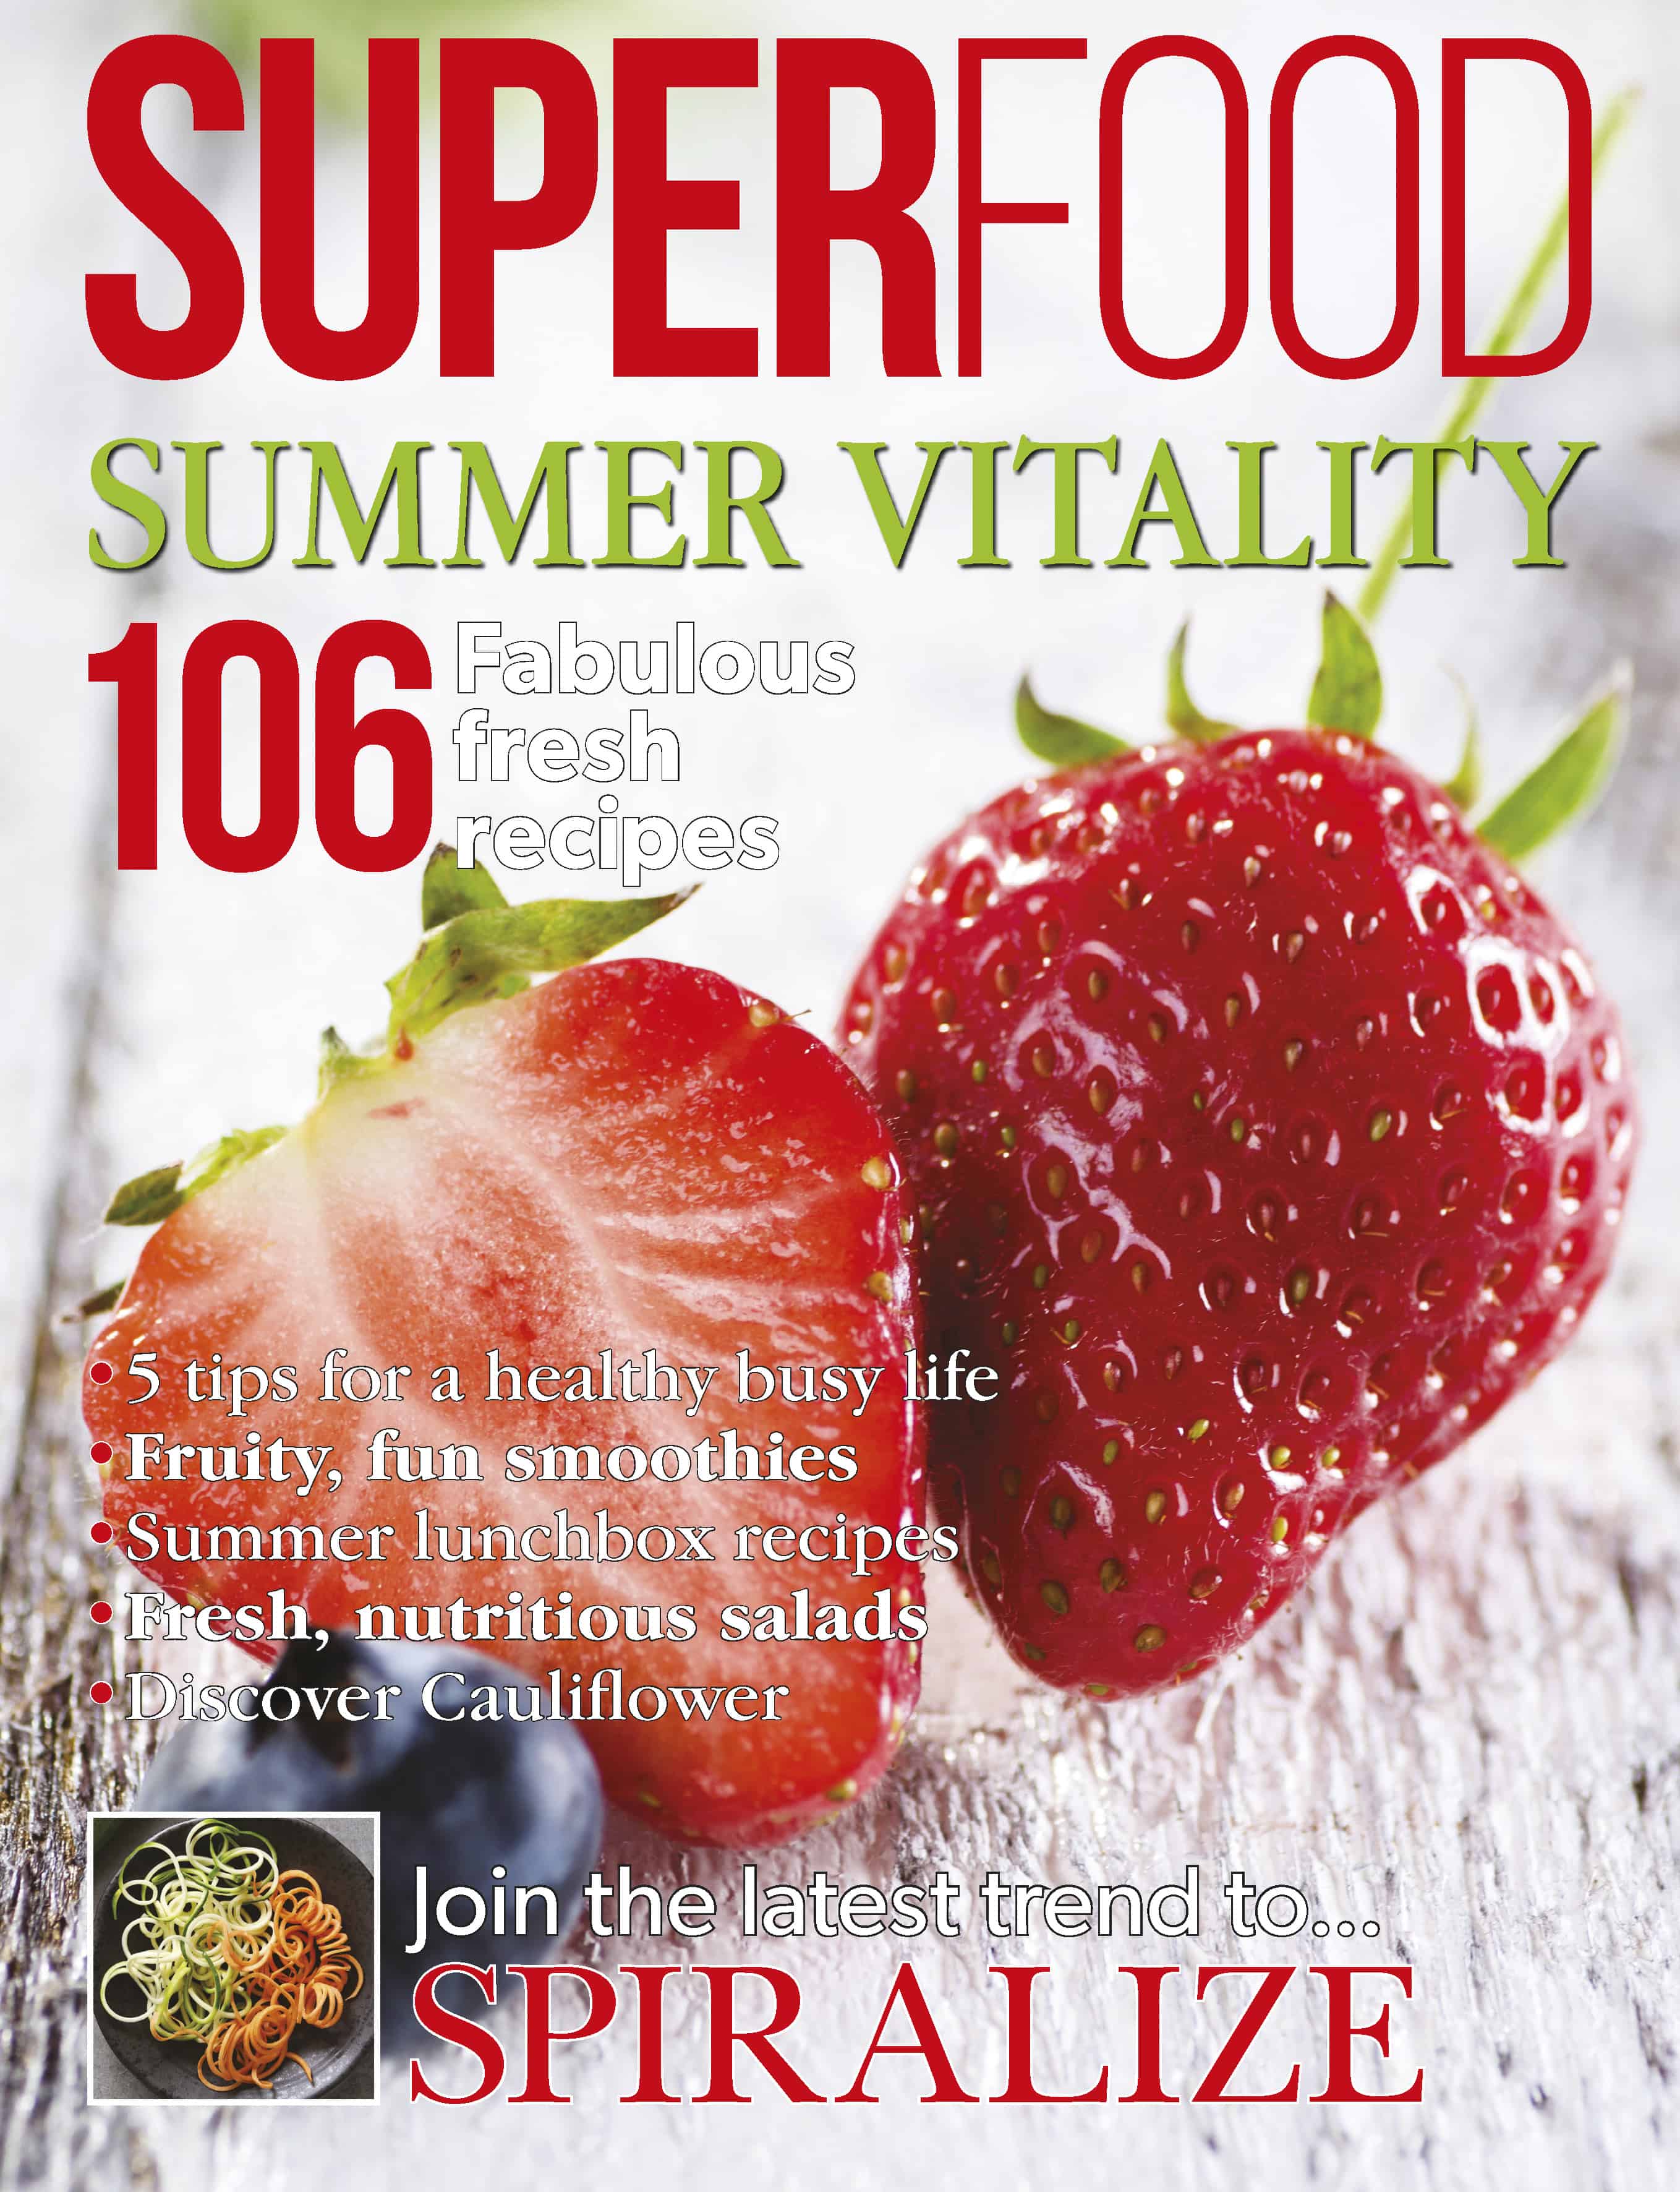 Superfood magazine front cover